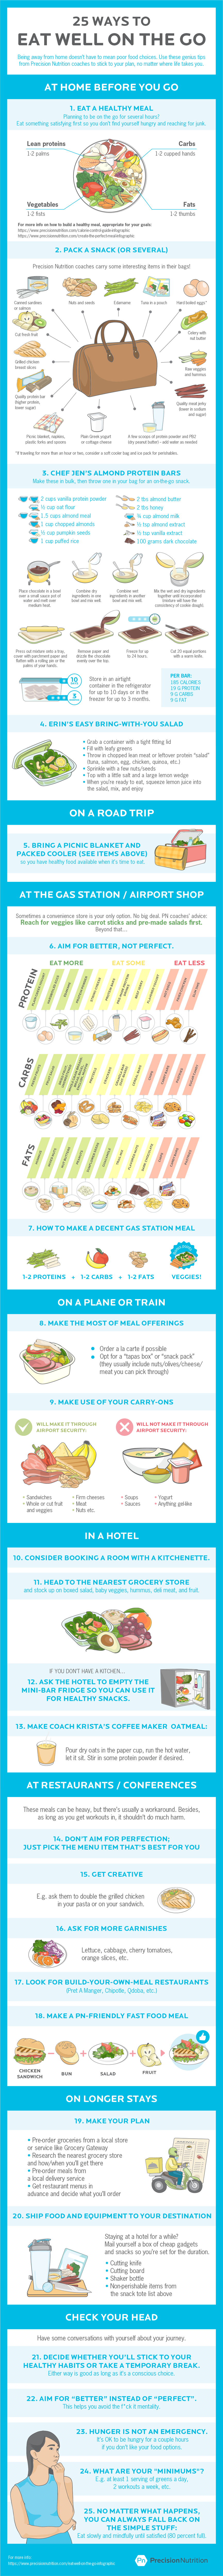 25 Ways to Eat Well on the Go